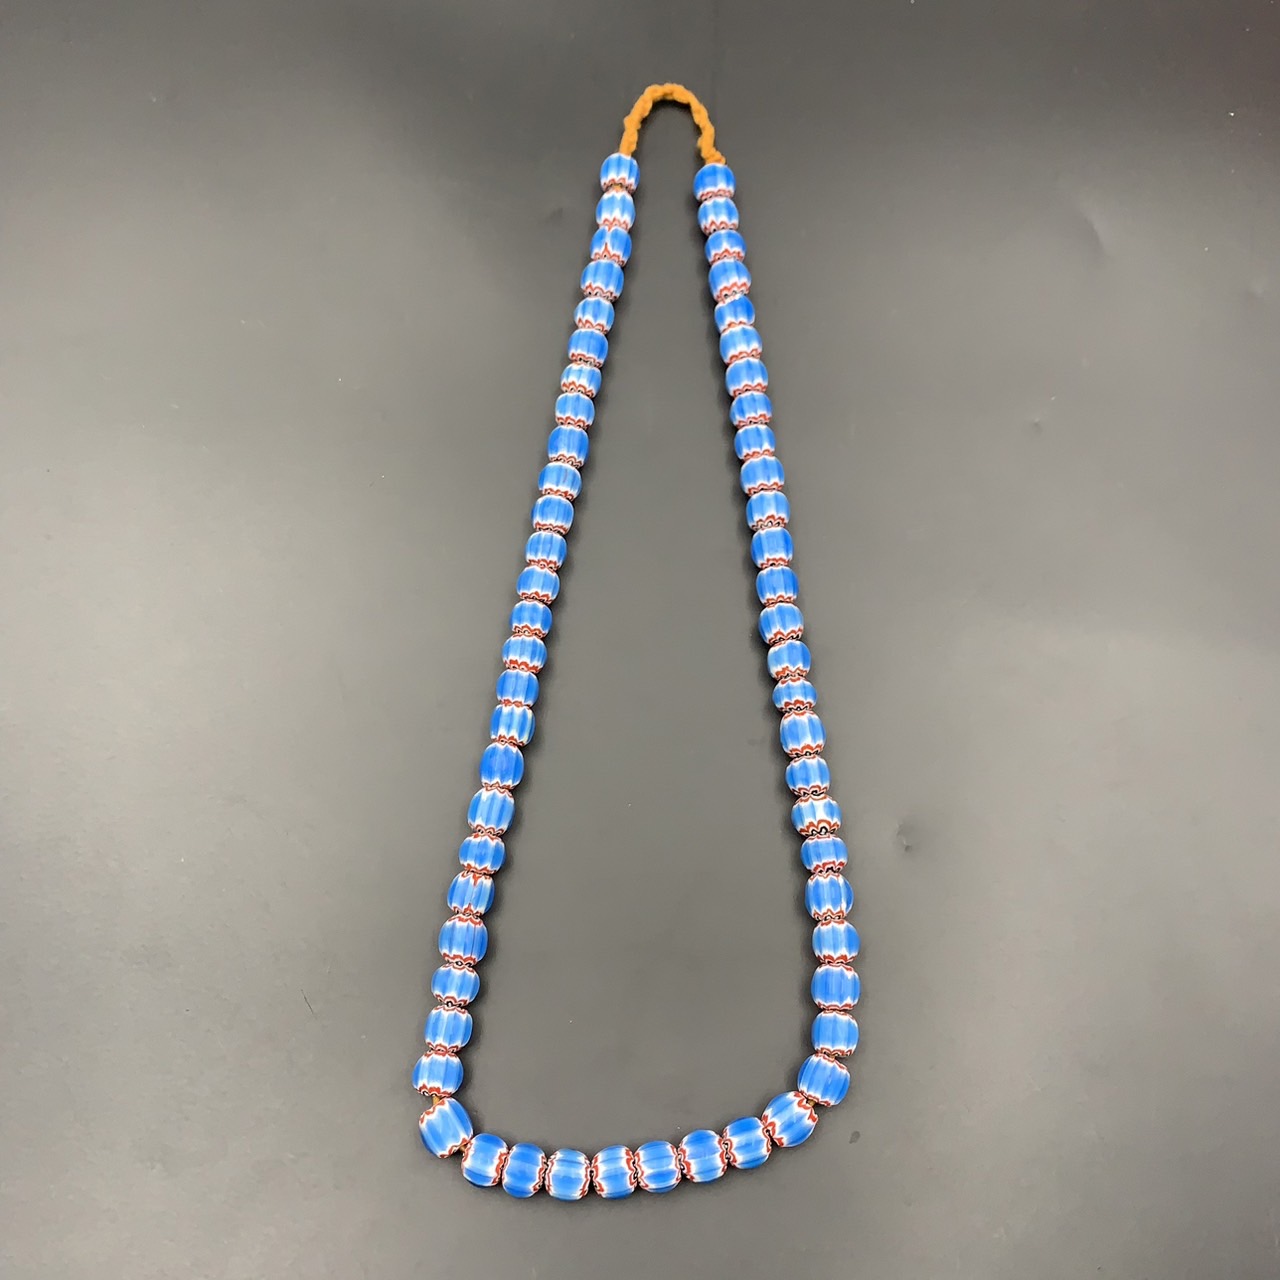 Awesome Sky Blue Vintage Chevron Trade Glass Beads Strand, African Glass Beads, LPBR-0319 - Image 7 of 7